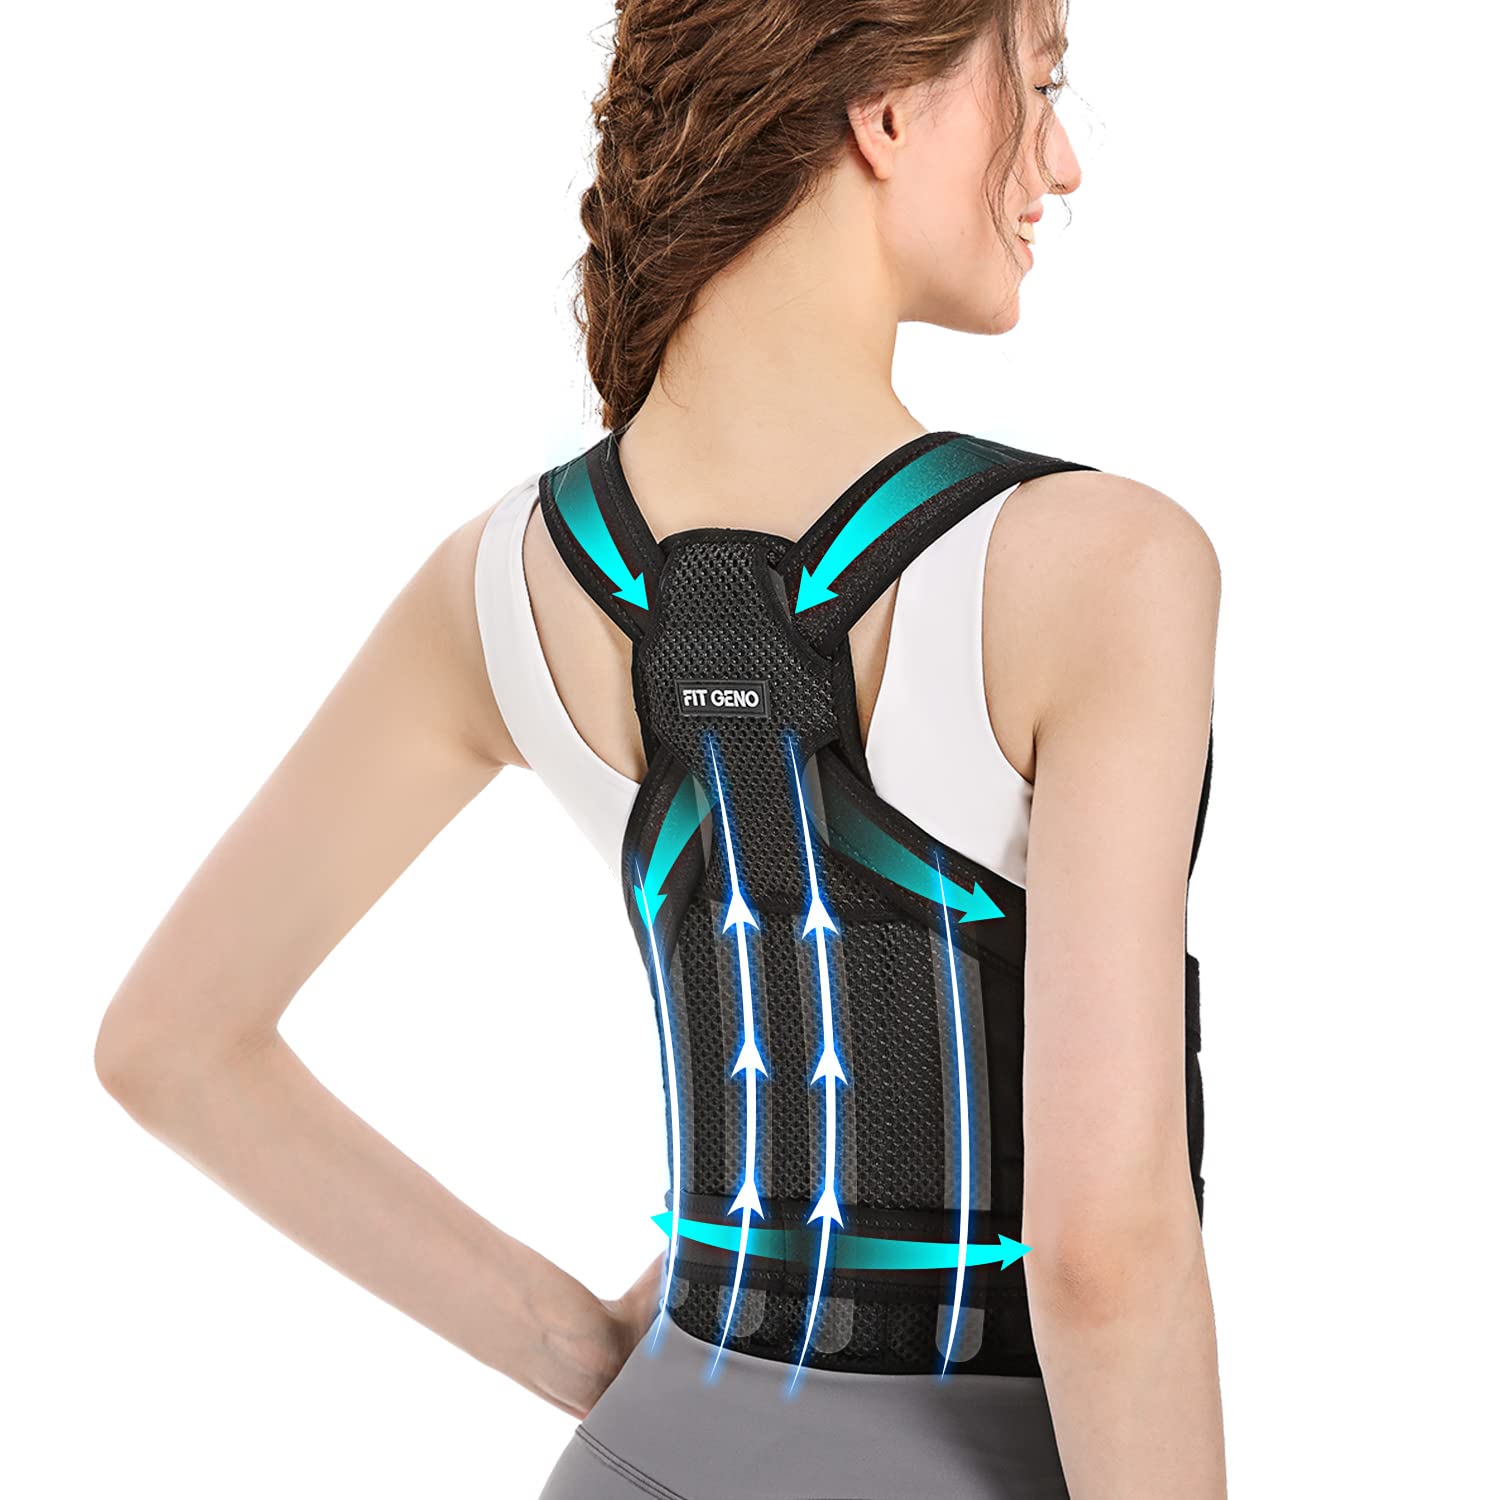 Fit Geno Back Brace and Posture Corrector